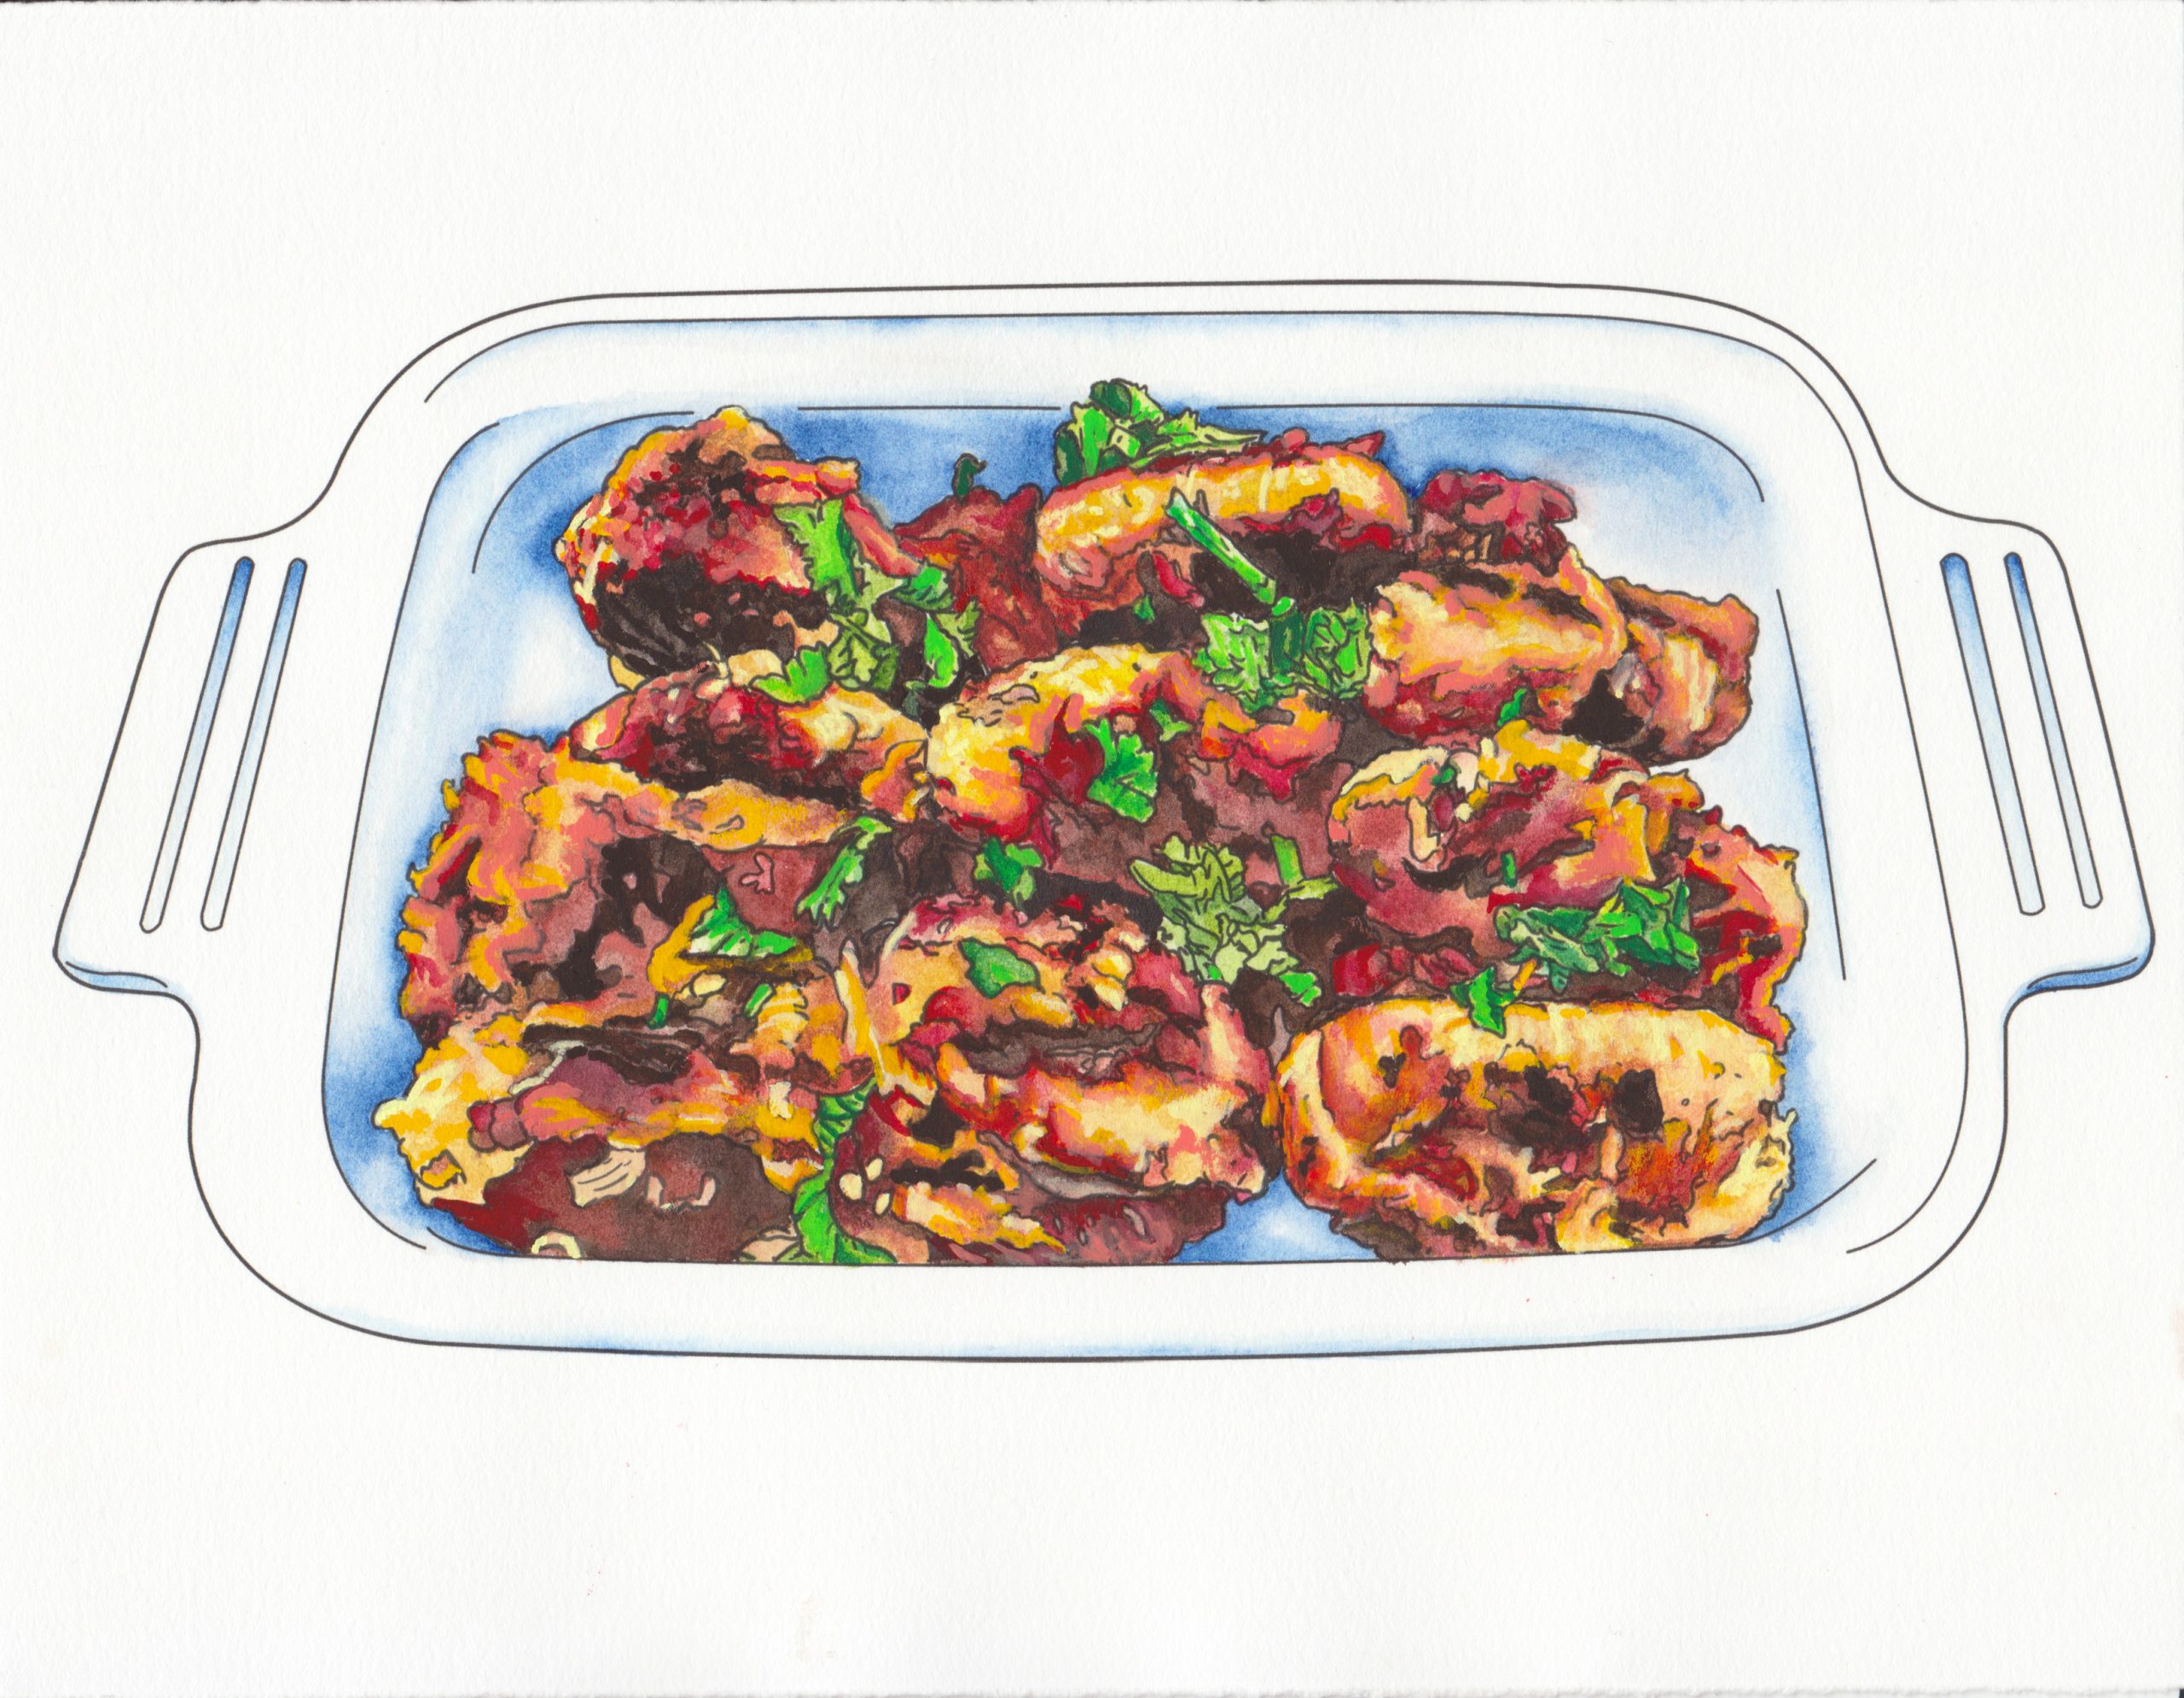 This is an overhead view of a horizontally oriented rectangular white dish filled with three rows of roughly cylindrically shaped Kebab Karahi. The serving dish has handles on each side and is illustrated economically using black lost and found contour lines and blue washes for the shadows. The chicken has been rendered in great detail with nuanced watercolor and gouache in oranges, yellow, tan, red, and maroon. The chicken is garnished with pops of green cilantro.